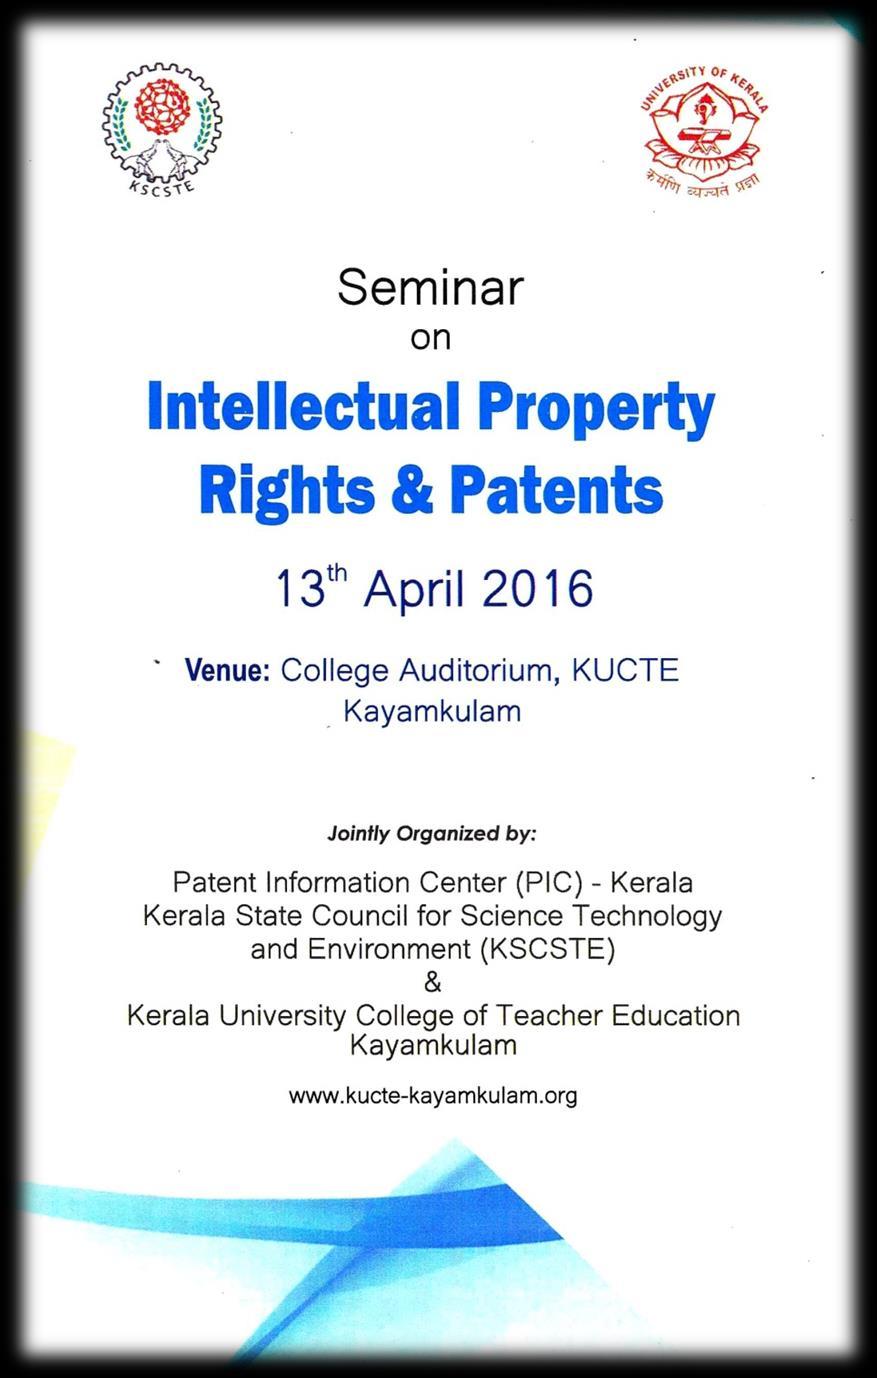 SEMINAR ON INTELLECTUAL PROPERTY RIGHTS